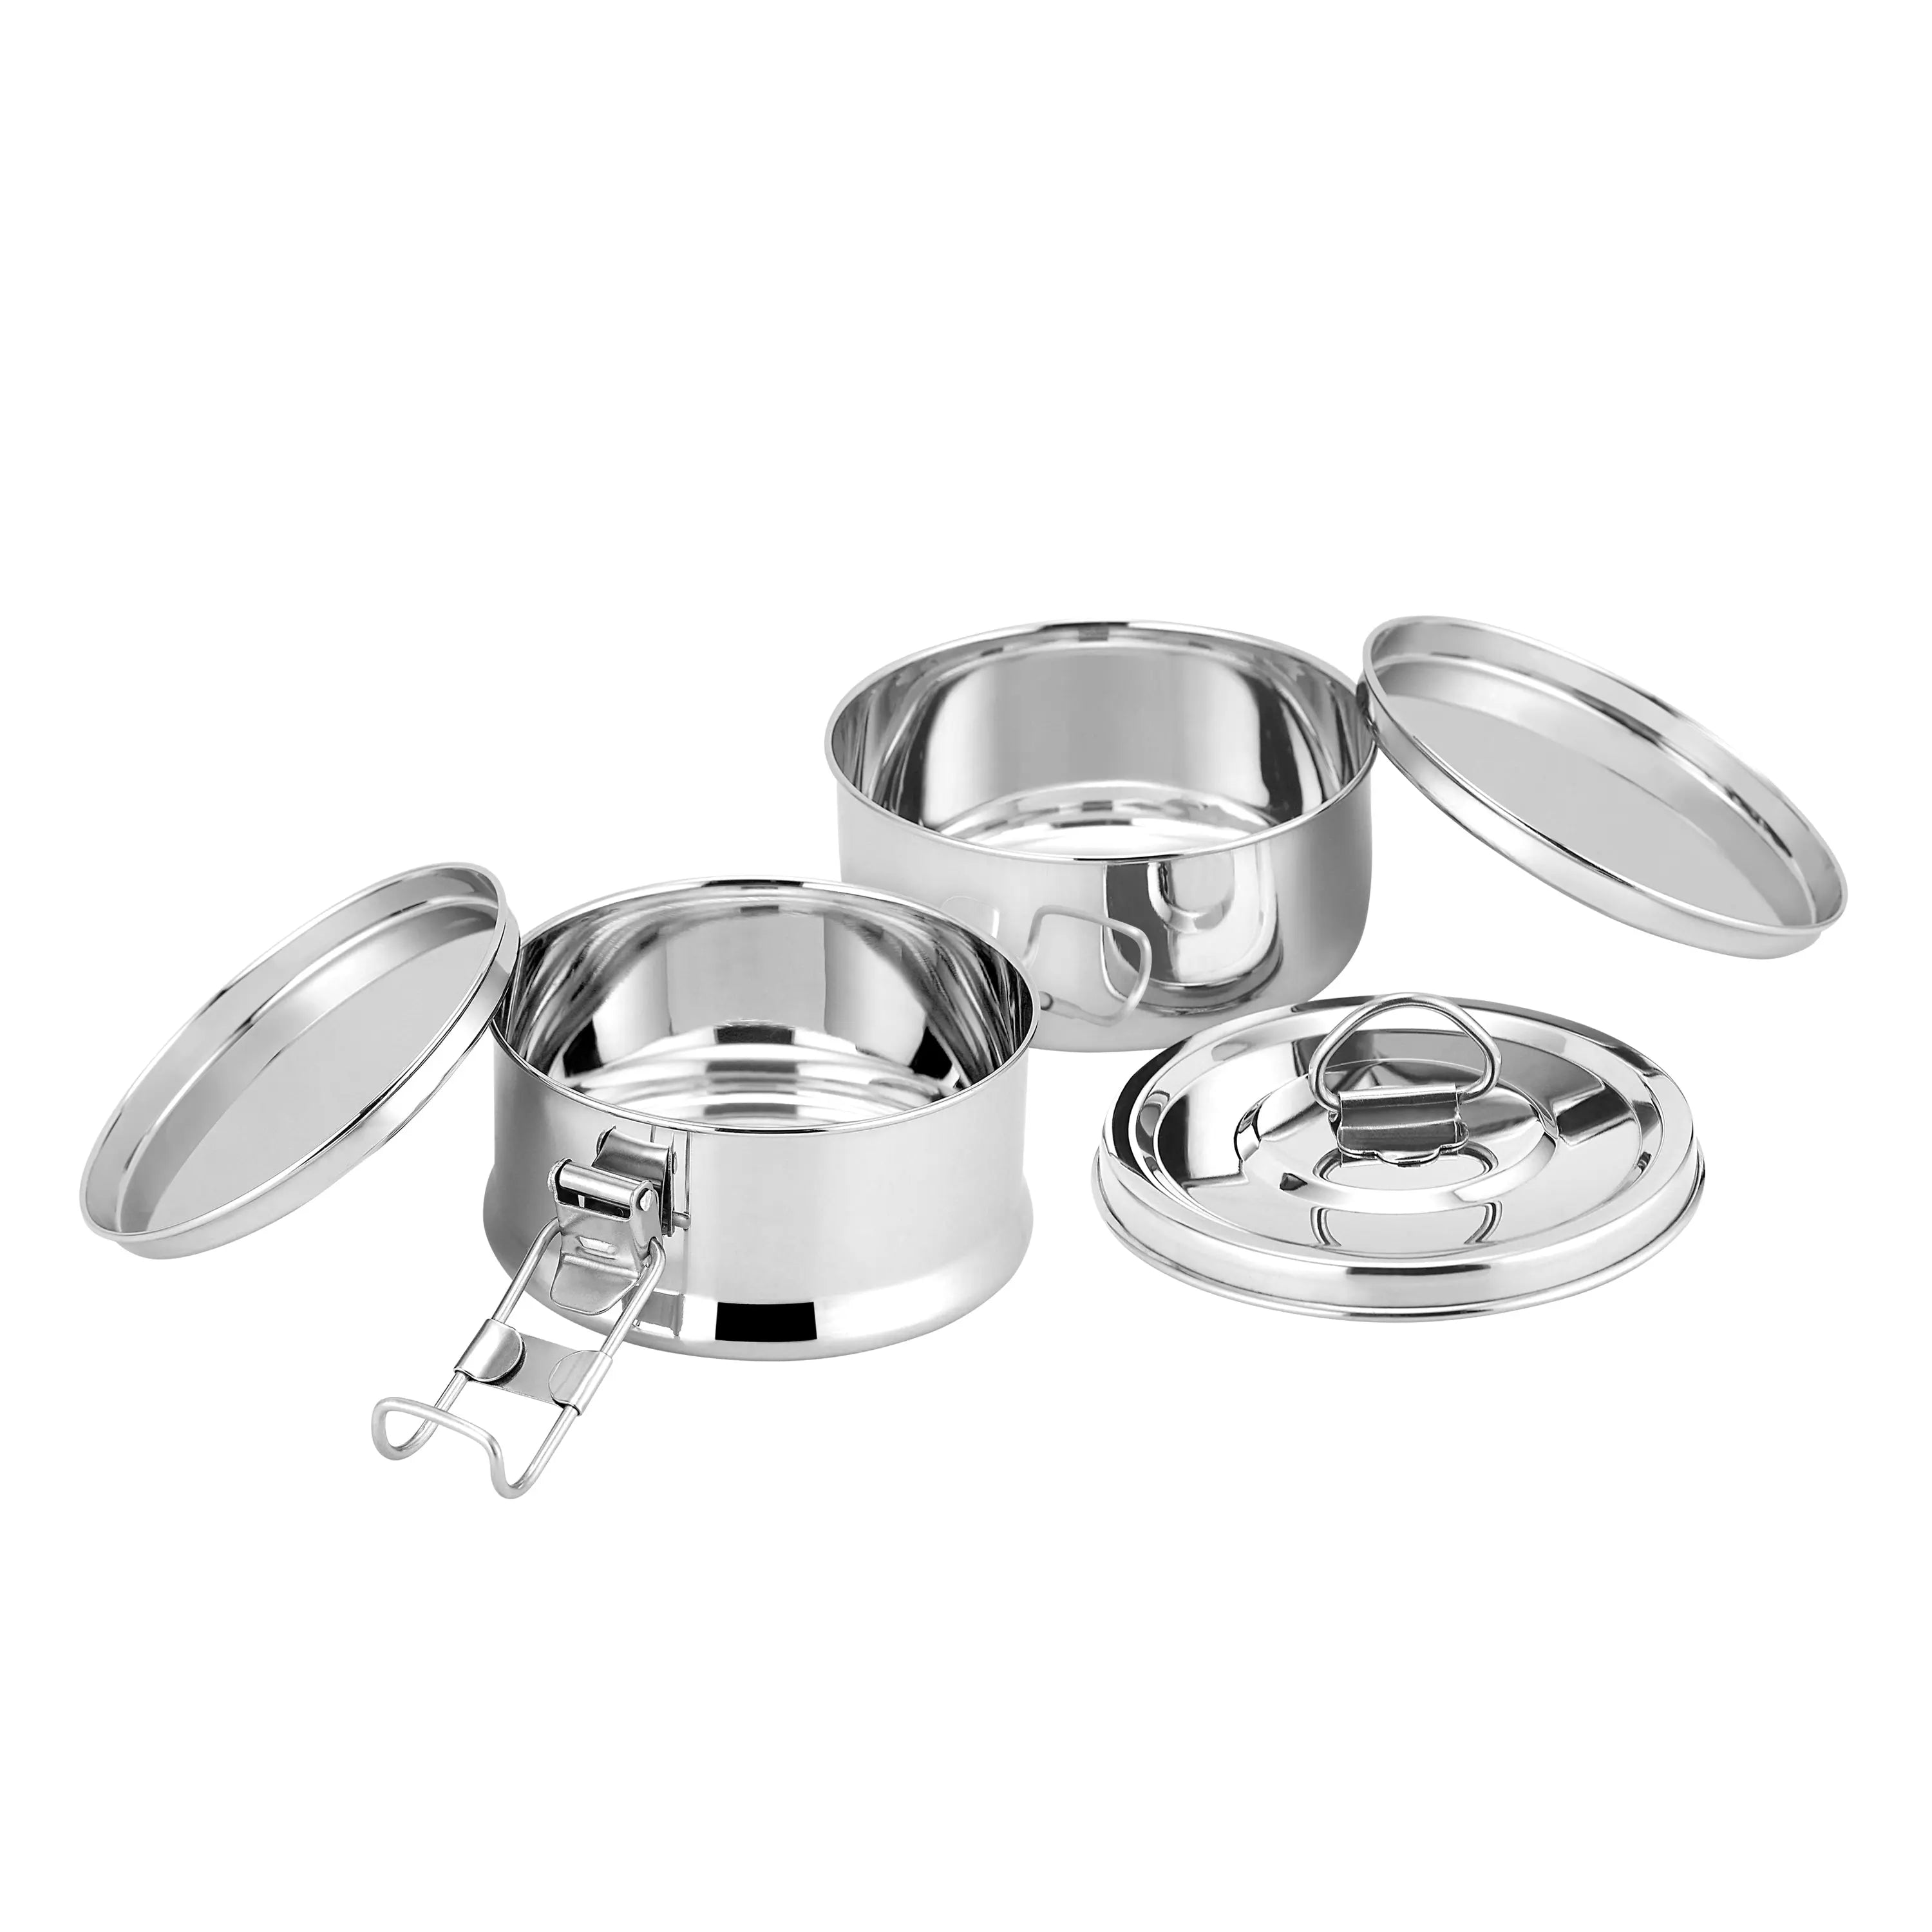 STAINLESS STEEL TIFFIN ROYAL - CROCKERY WALA AND COMPANY 